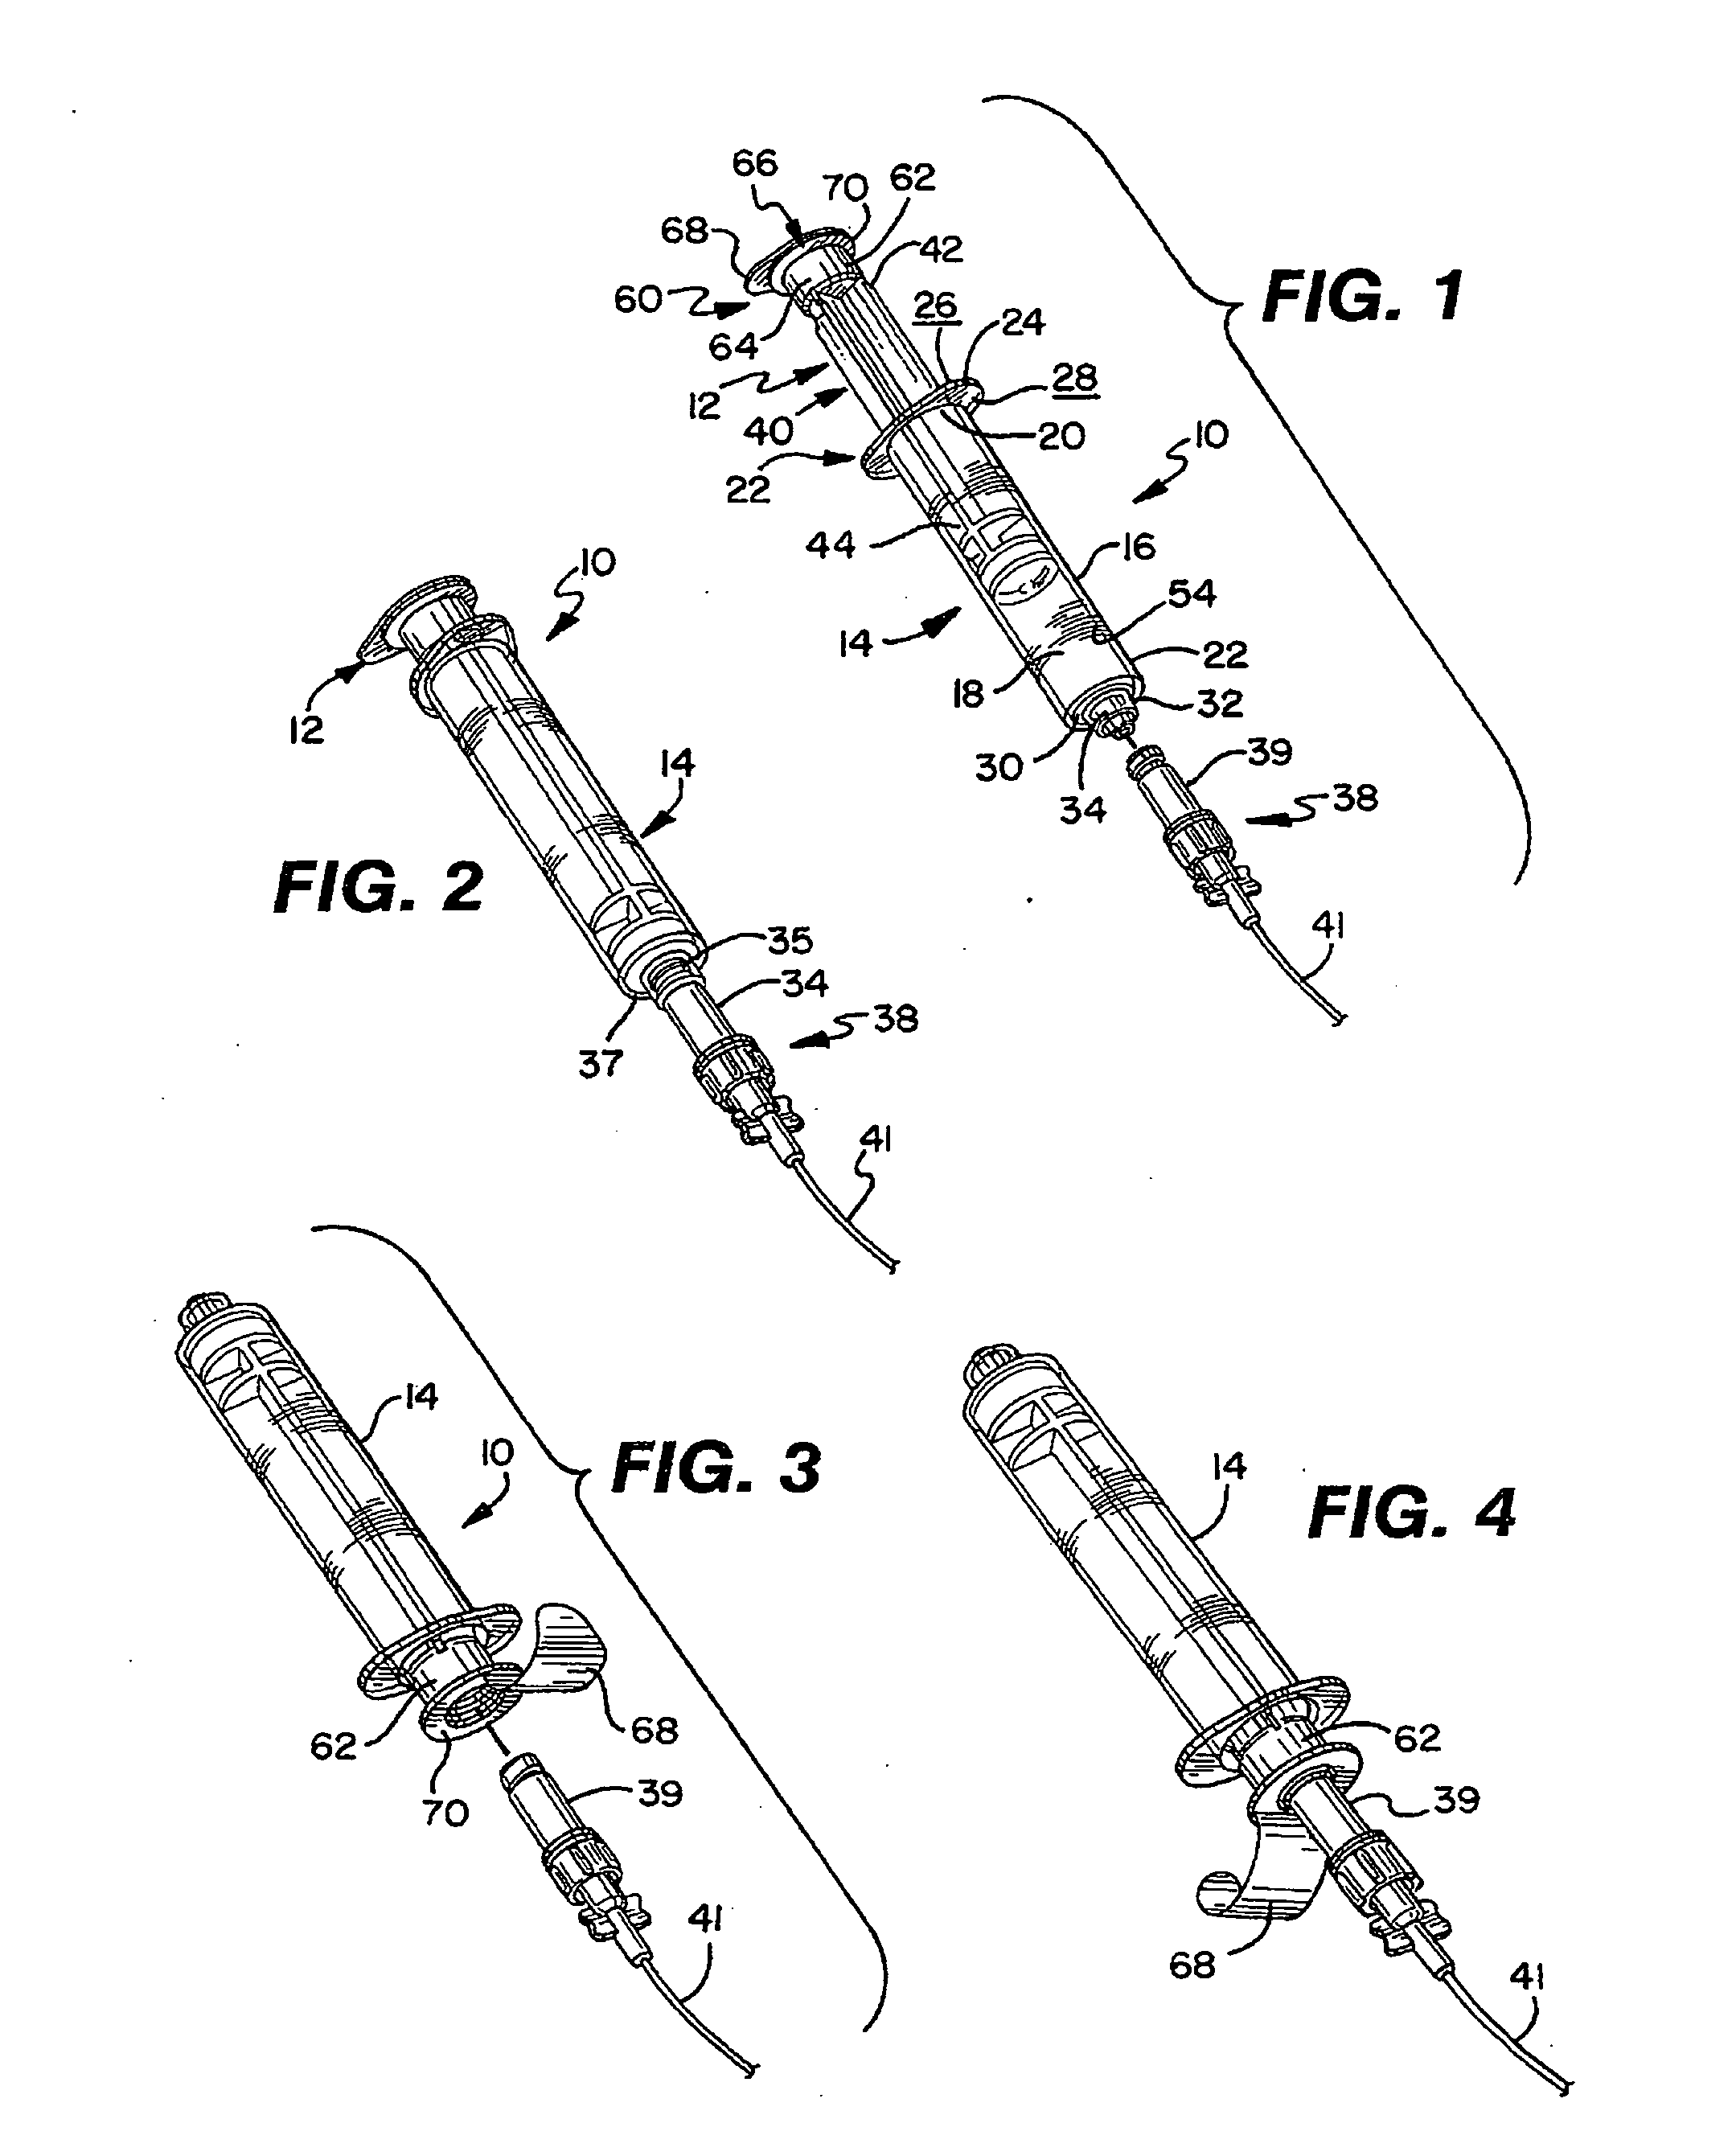 Antiseptic cap and antiseptic cap equipped plunger and syringe barrel assembly